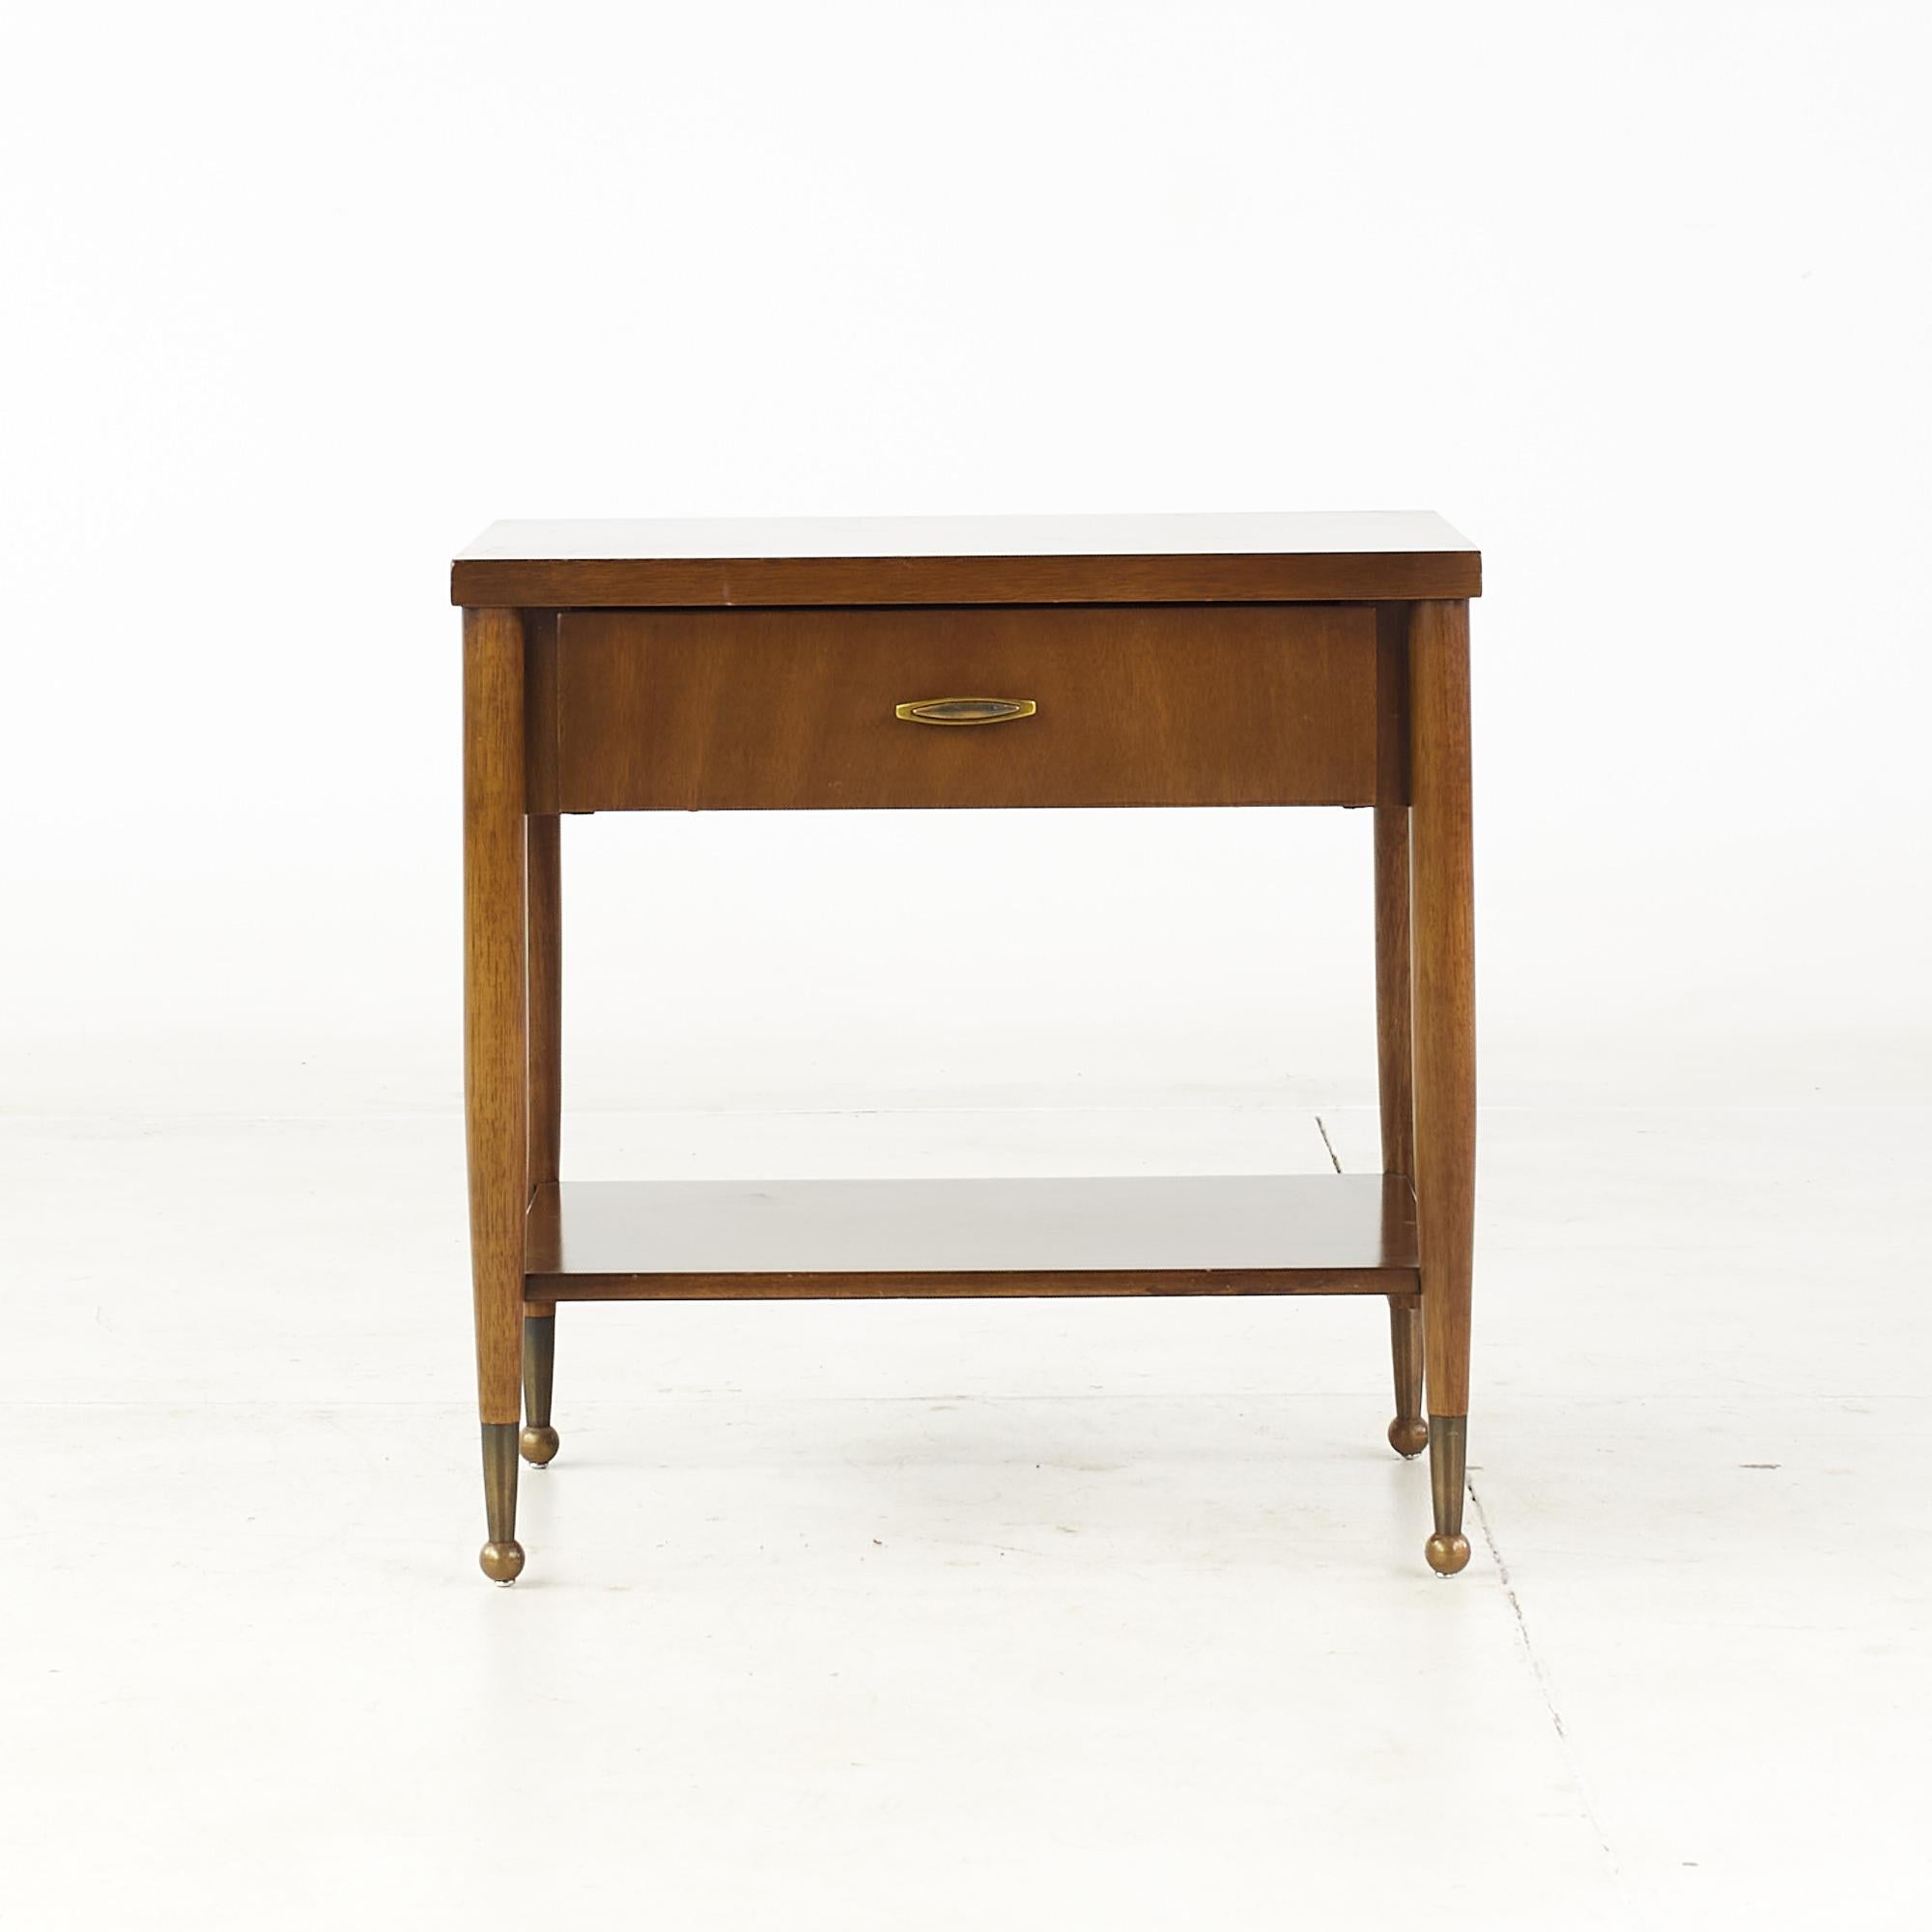 Broyhill Cerama mid century walnut and brass nightstand

This nightstand measures: 22 wide x 15 deep x 22 inches high

All pieces of furniture can be had in what we call restored vintage condition. That means the piece is restored upon purchase